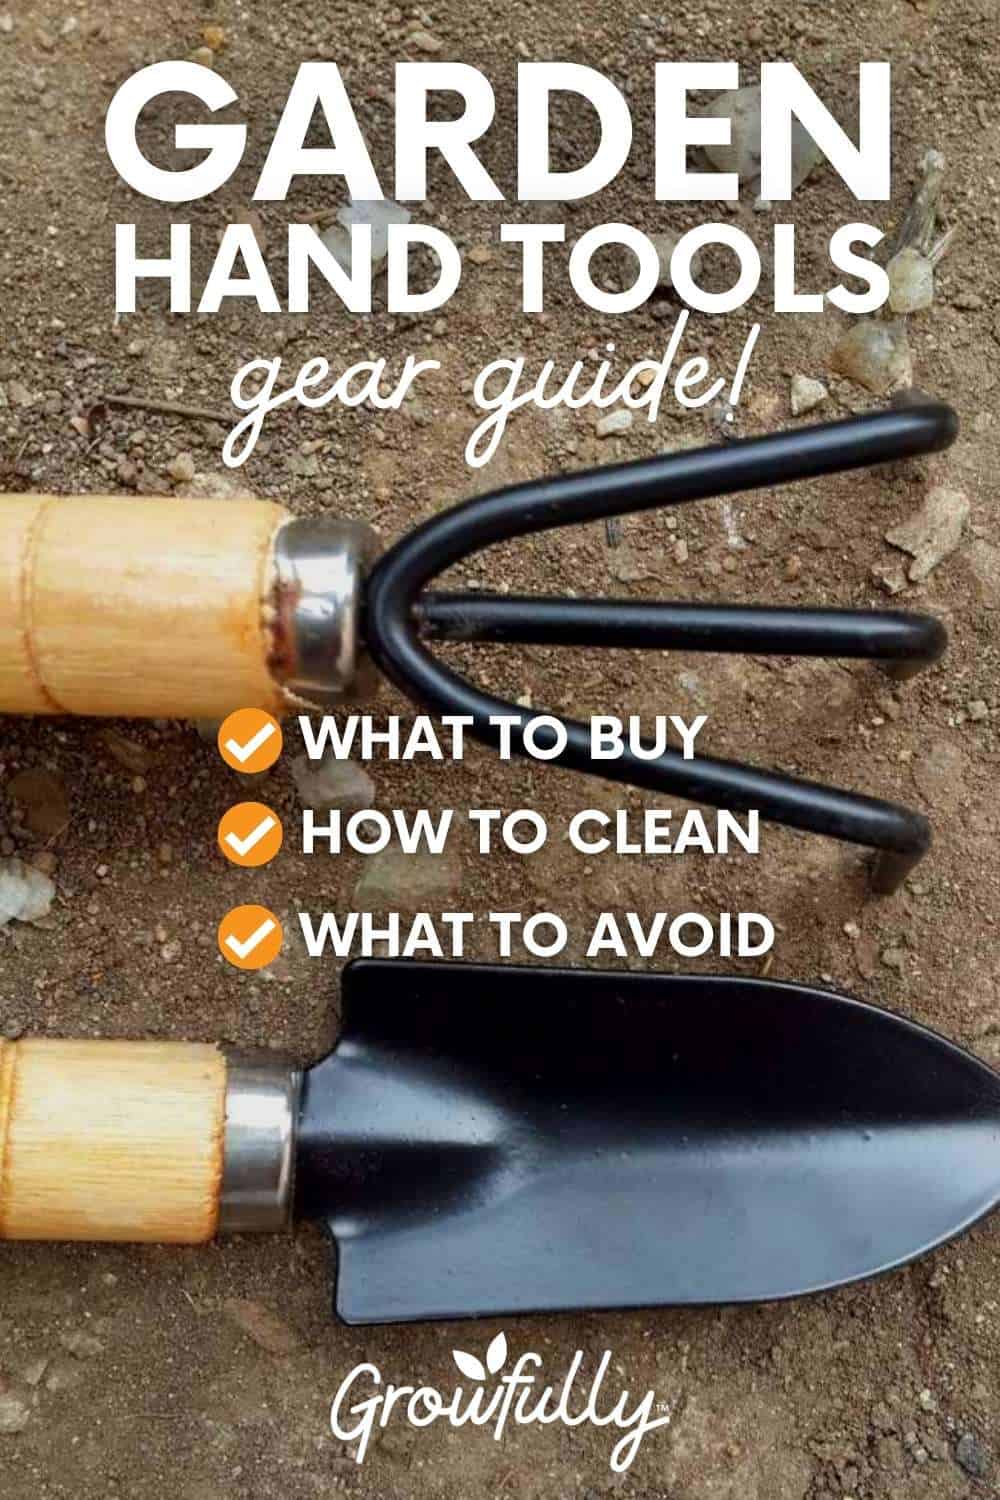 How to Sharpen Garden Tools - An In-Depth Guide